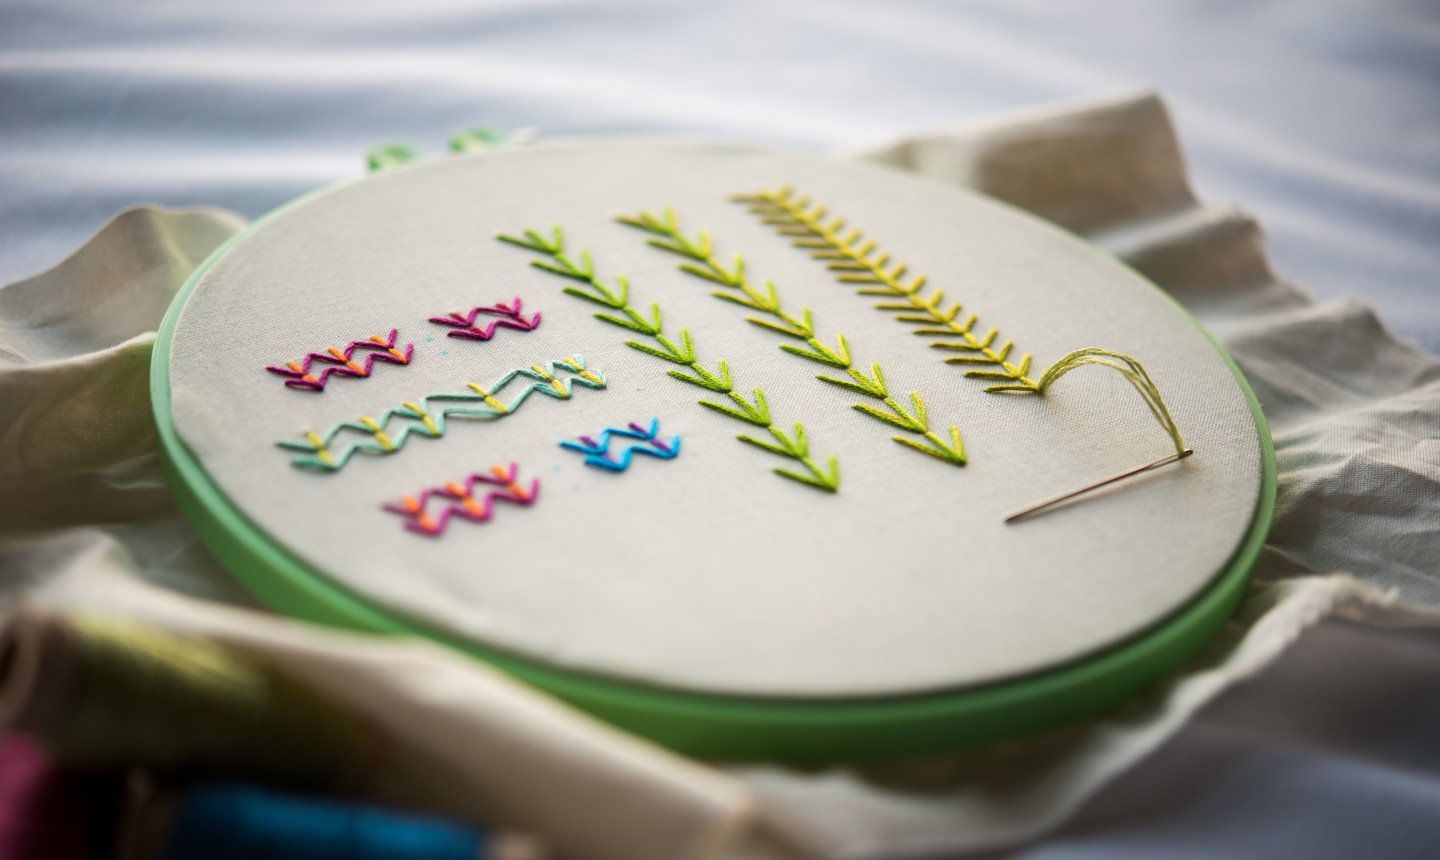 Embroidery Pattern Maker The Top 10 Hand Embroidery Stitches Every Beginner Should Learn